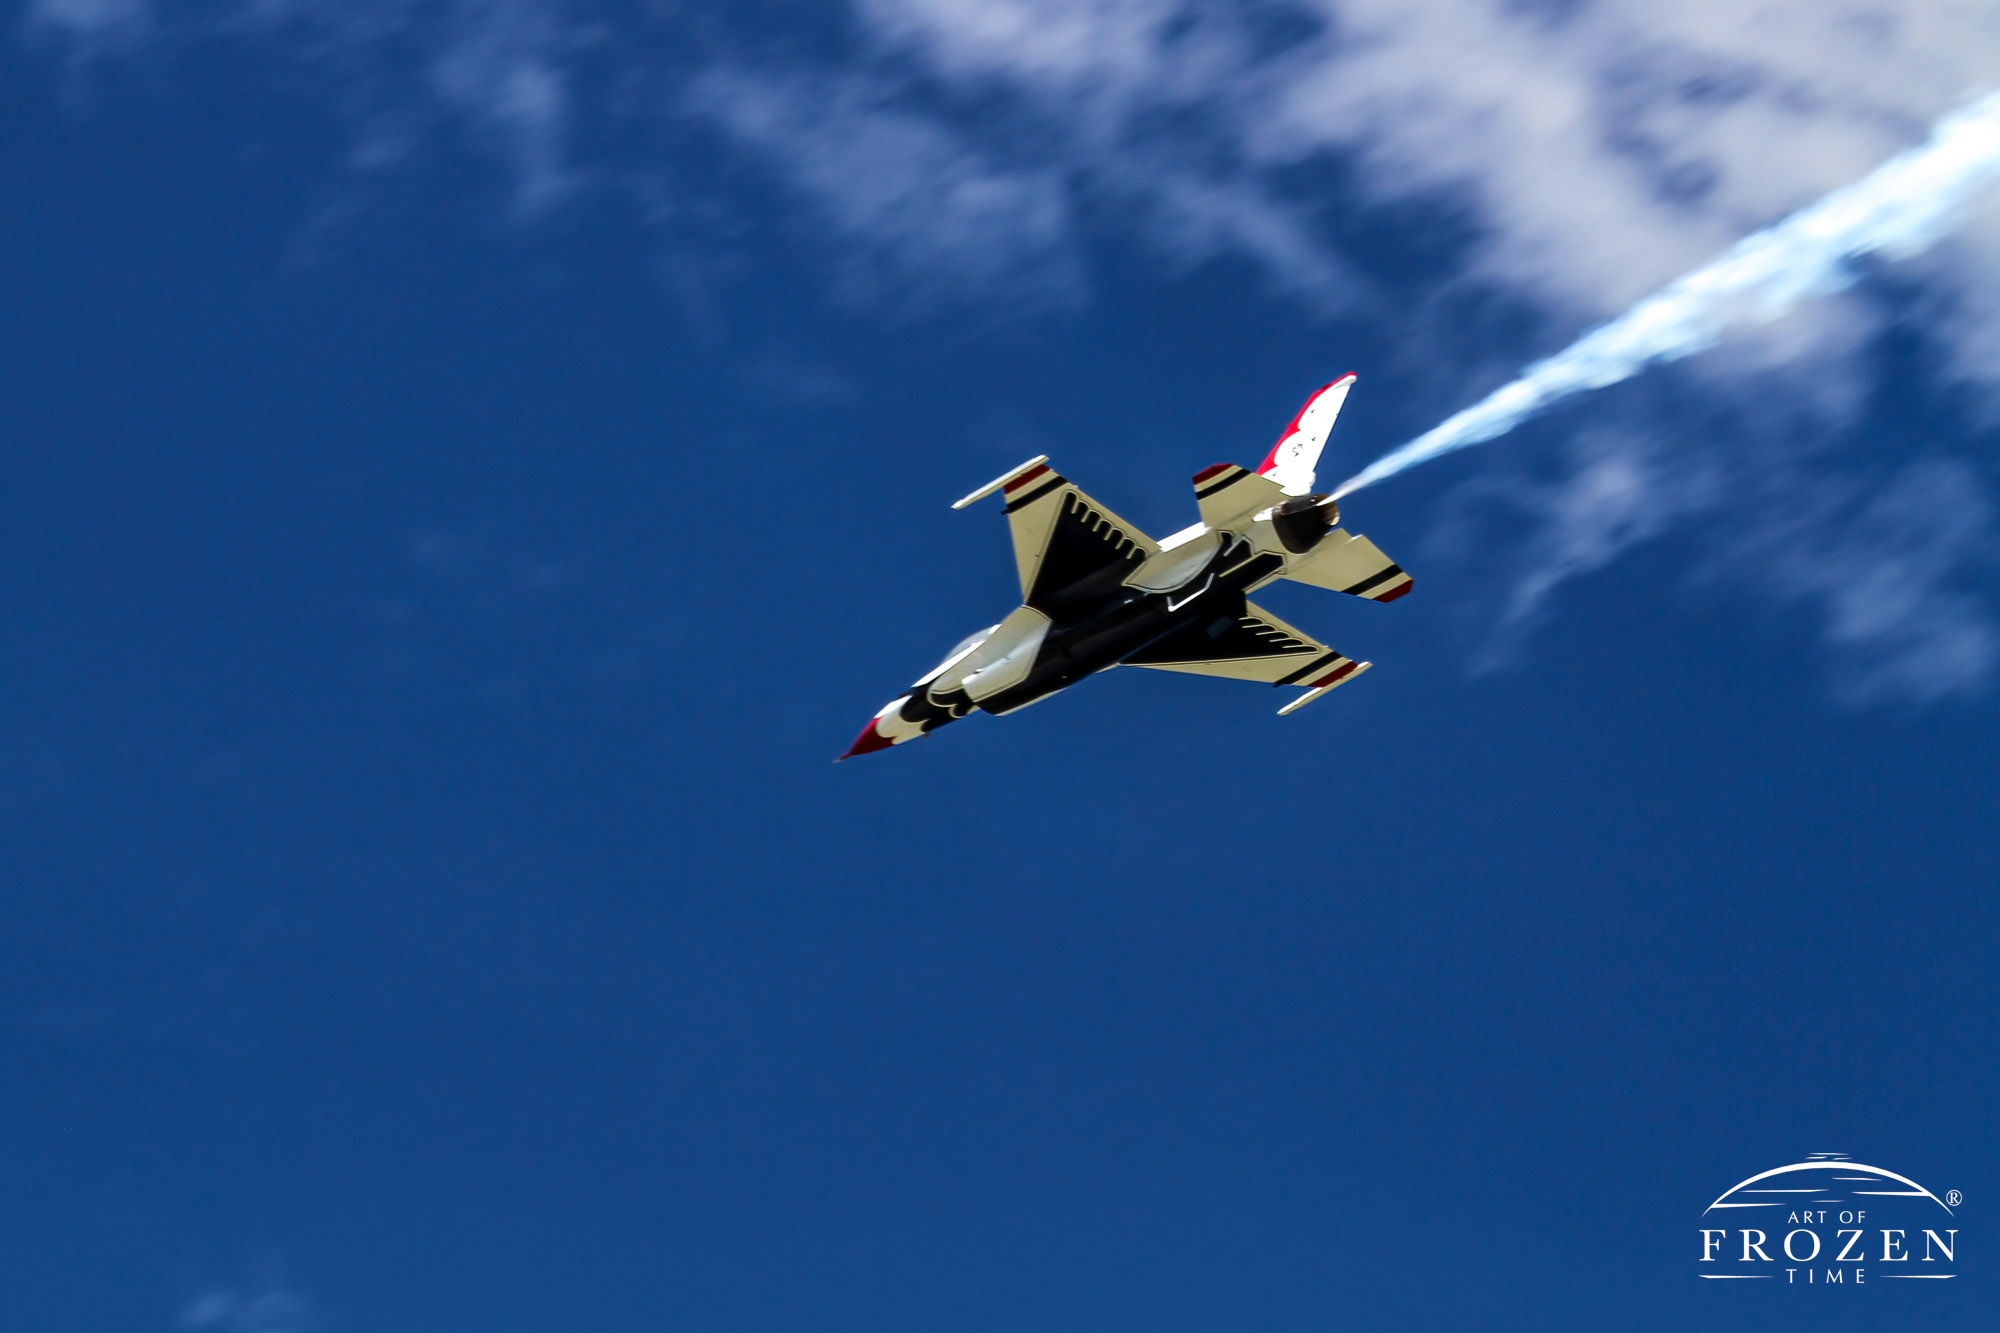 US Air Force Thunderbird making a high-speed pass with smoke on where the white contrast with the blue azure skies.